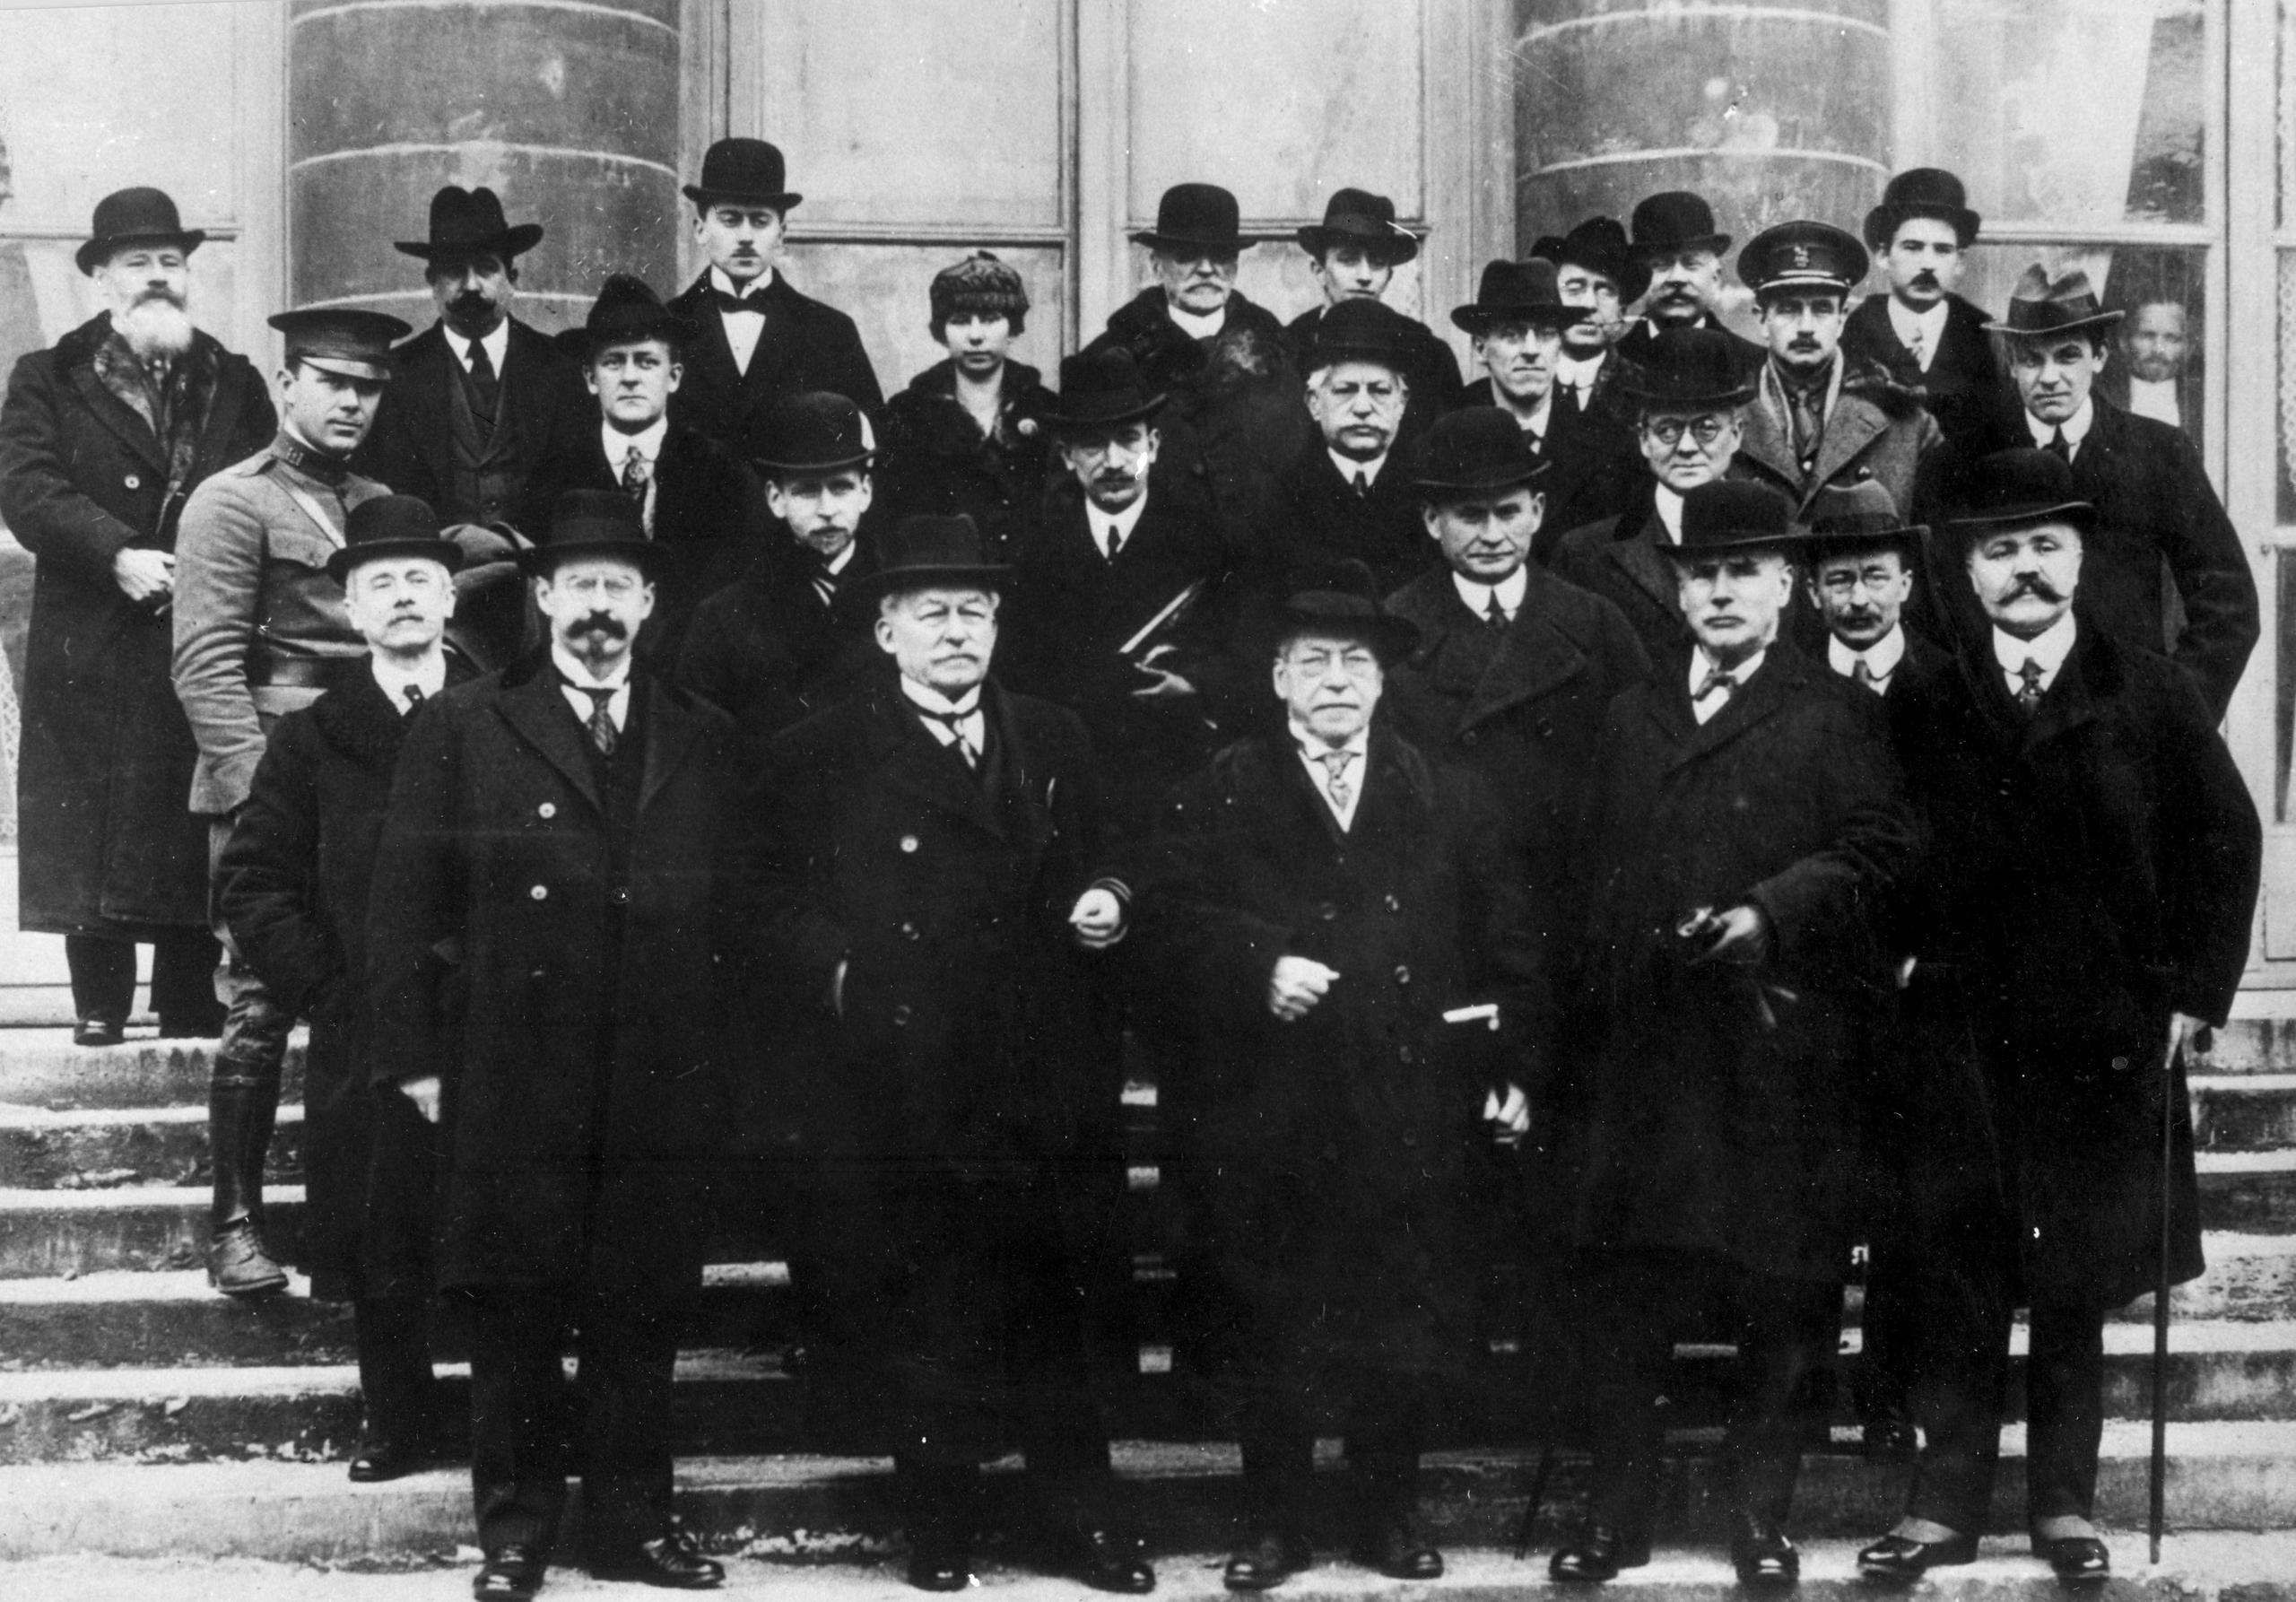 Members of the Commission on International Labour Legislation to the 1919 Paris Peace Conference